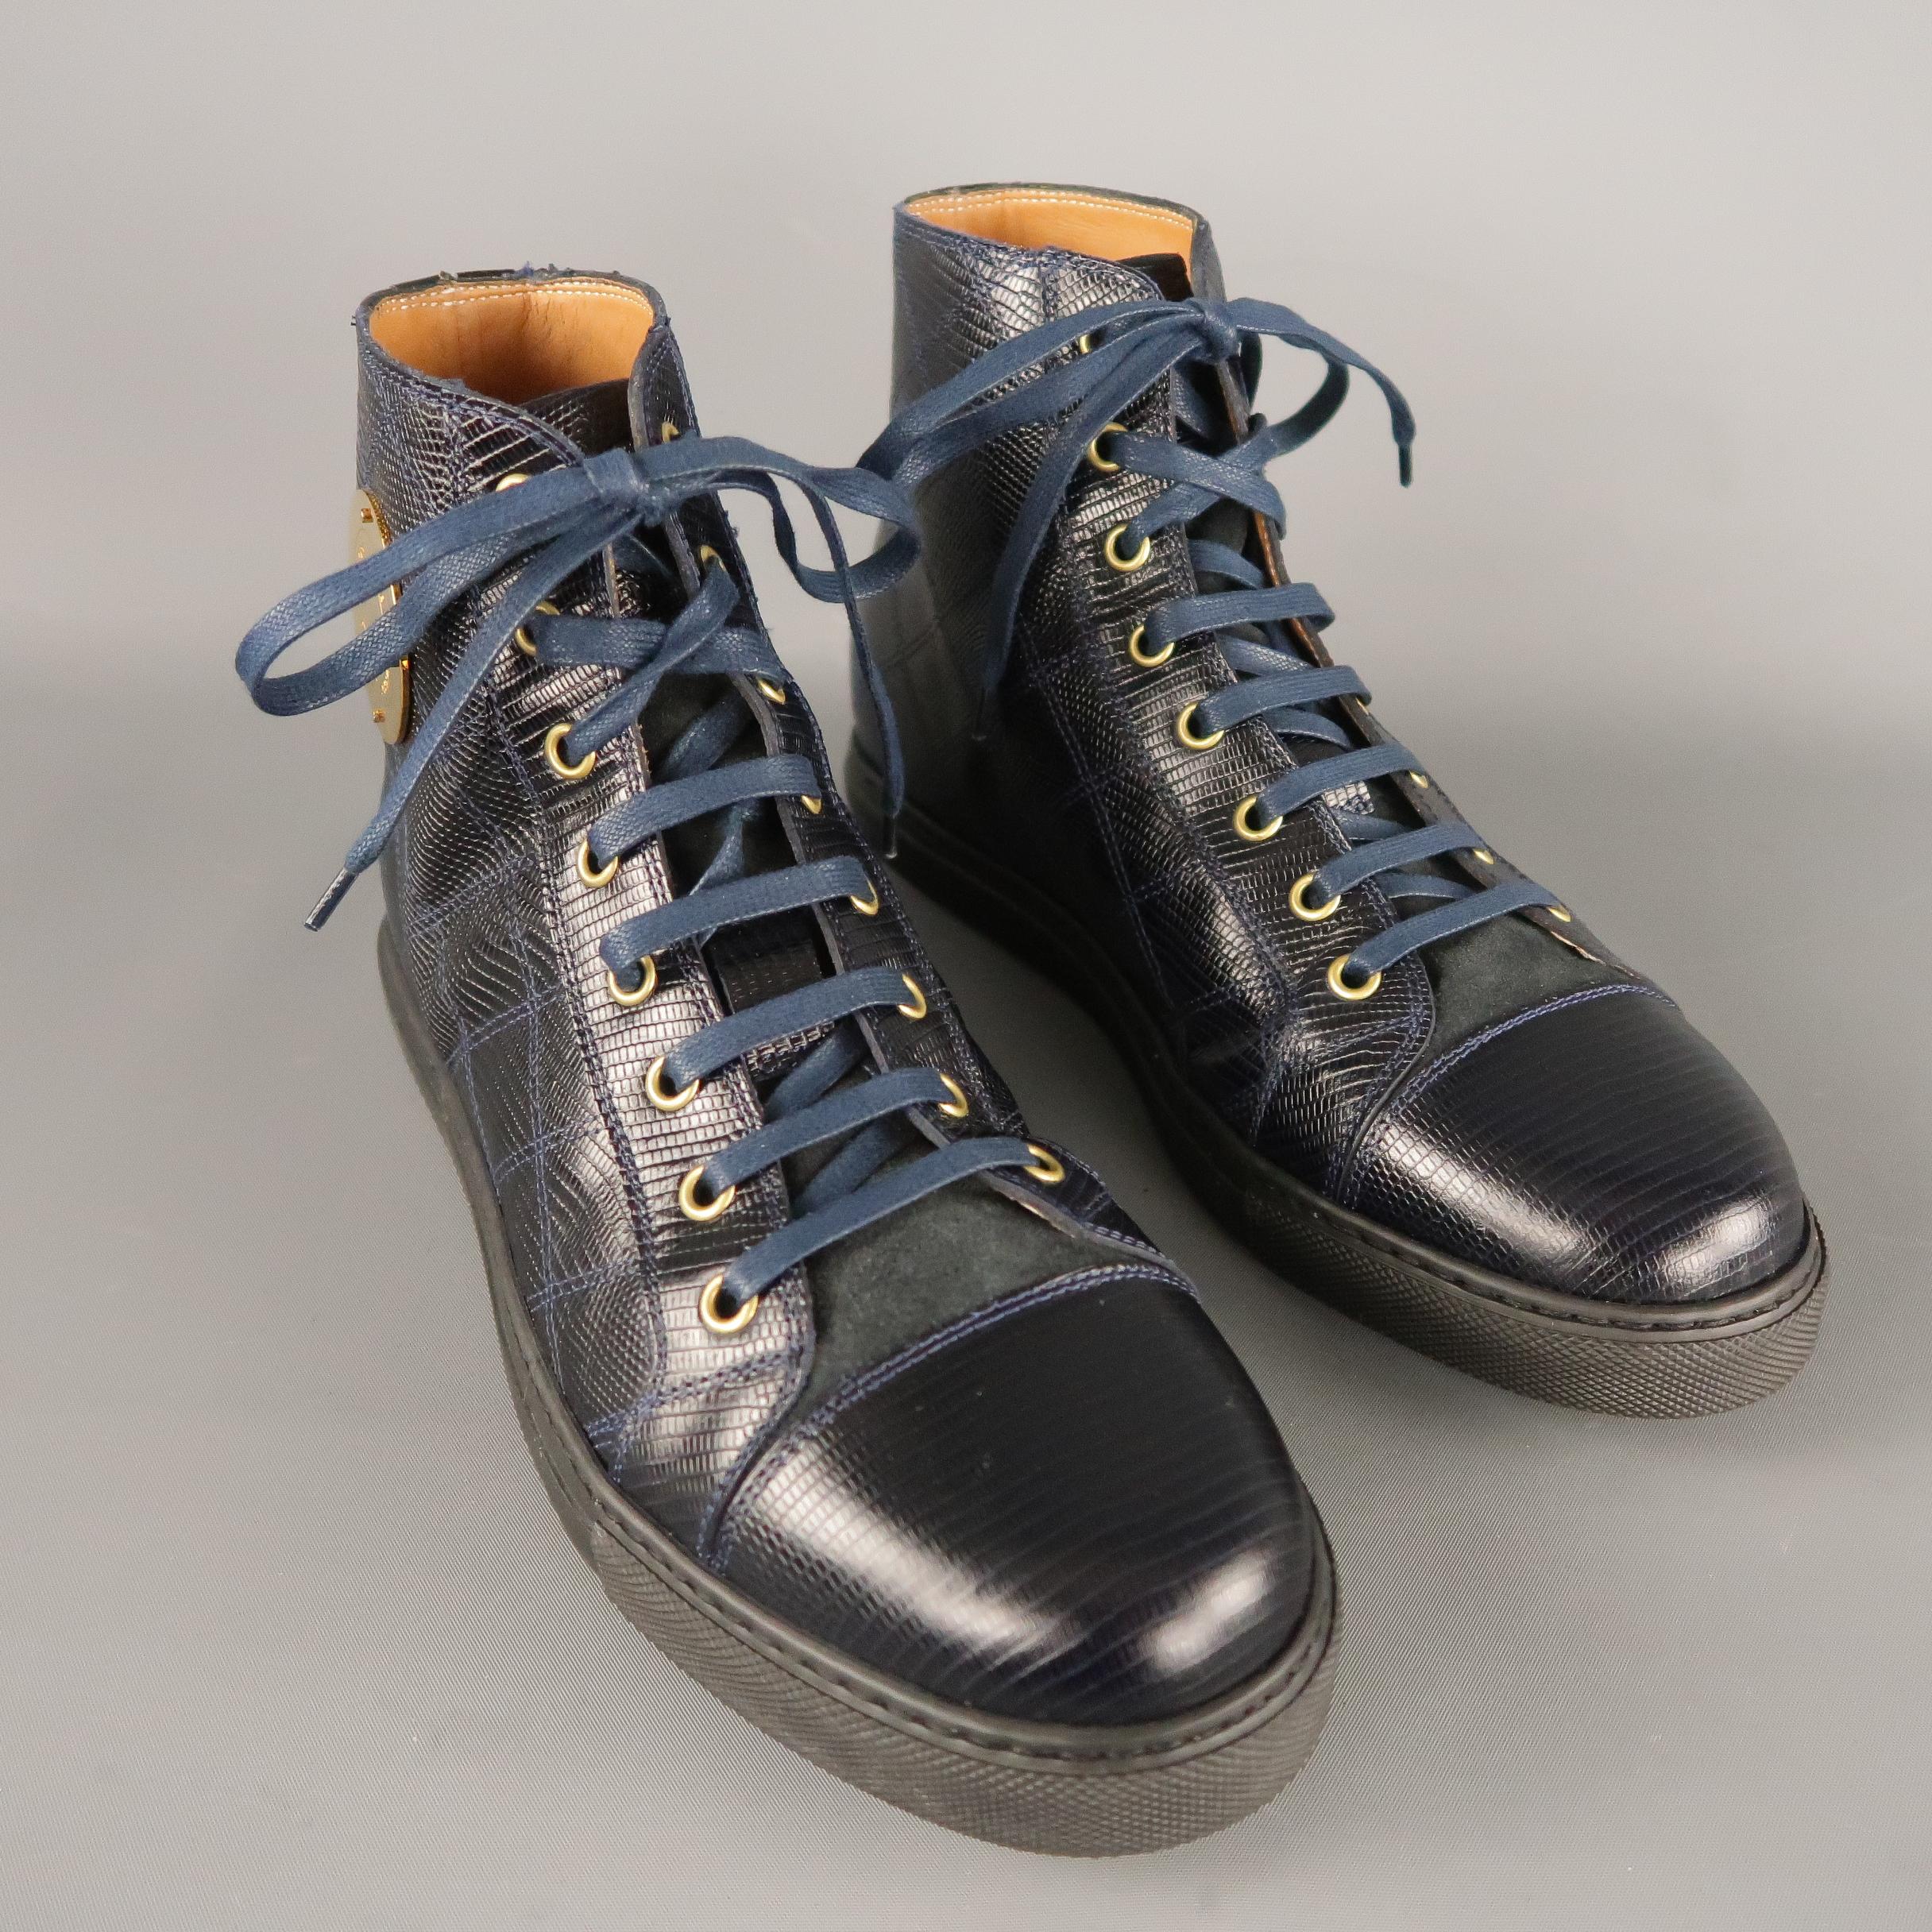 MARC JACOBS High Top Sneakers comes in a navy tone in a lizard quilted leather material, styled with a cap toe and a gold tone metal brand hardware. With Box. Made in Italy.
 
Excellent Pre-Owned Condition.
Marked: 40 IT
 
Measurements:
 
Length: 11